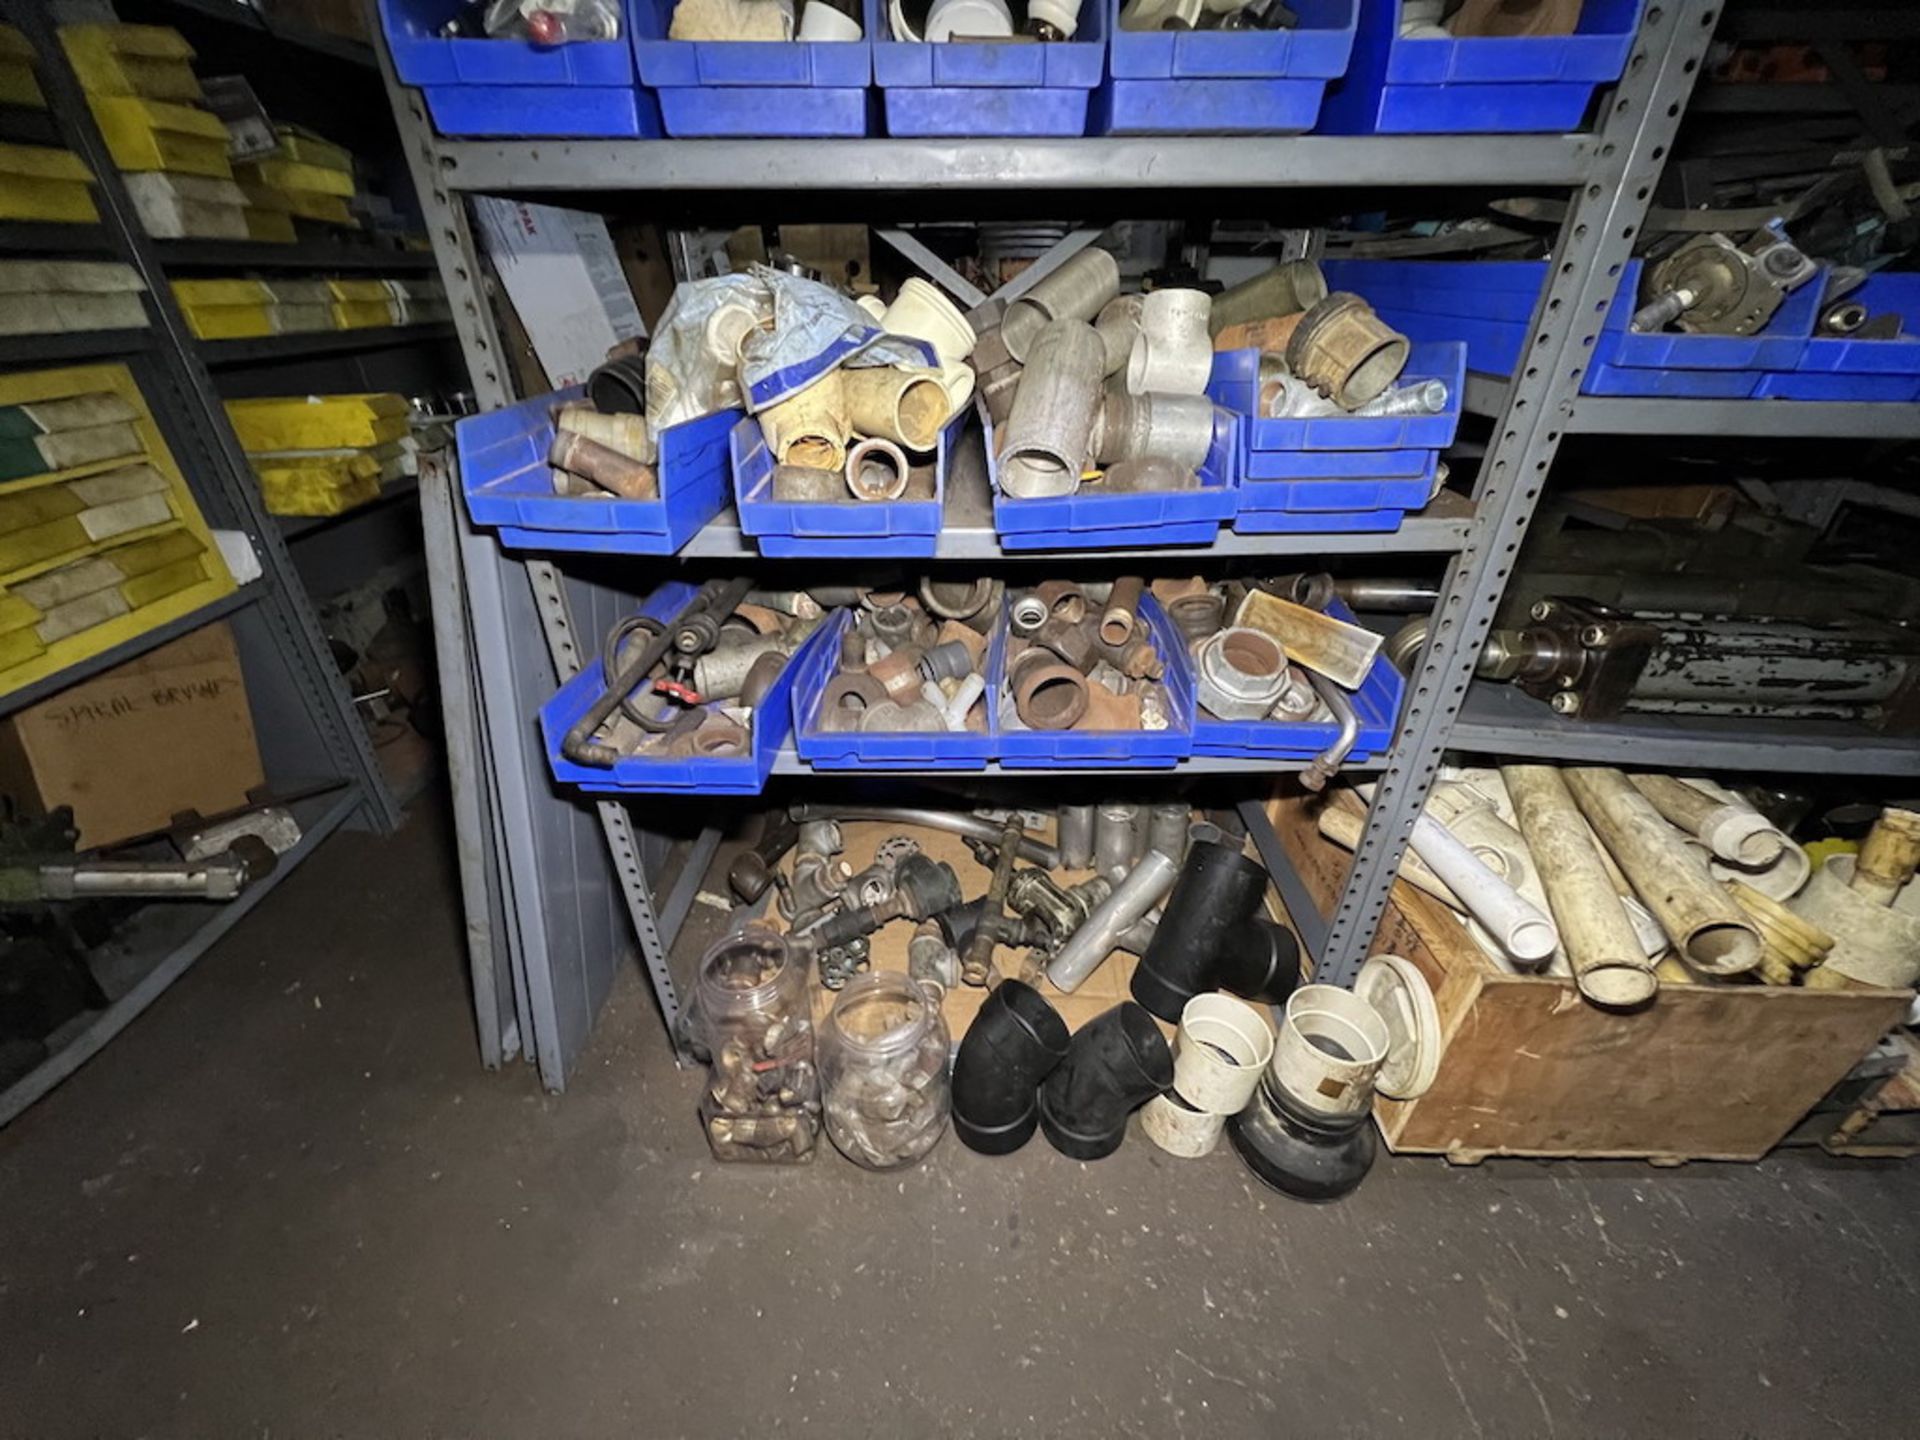 Remaining Contents of Parts Room - Image 48 of 60